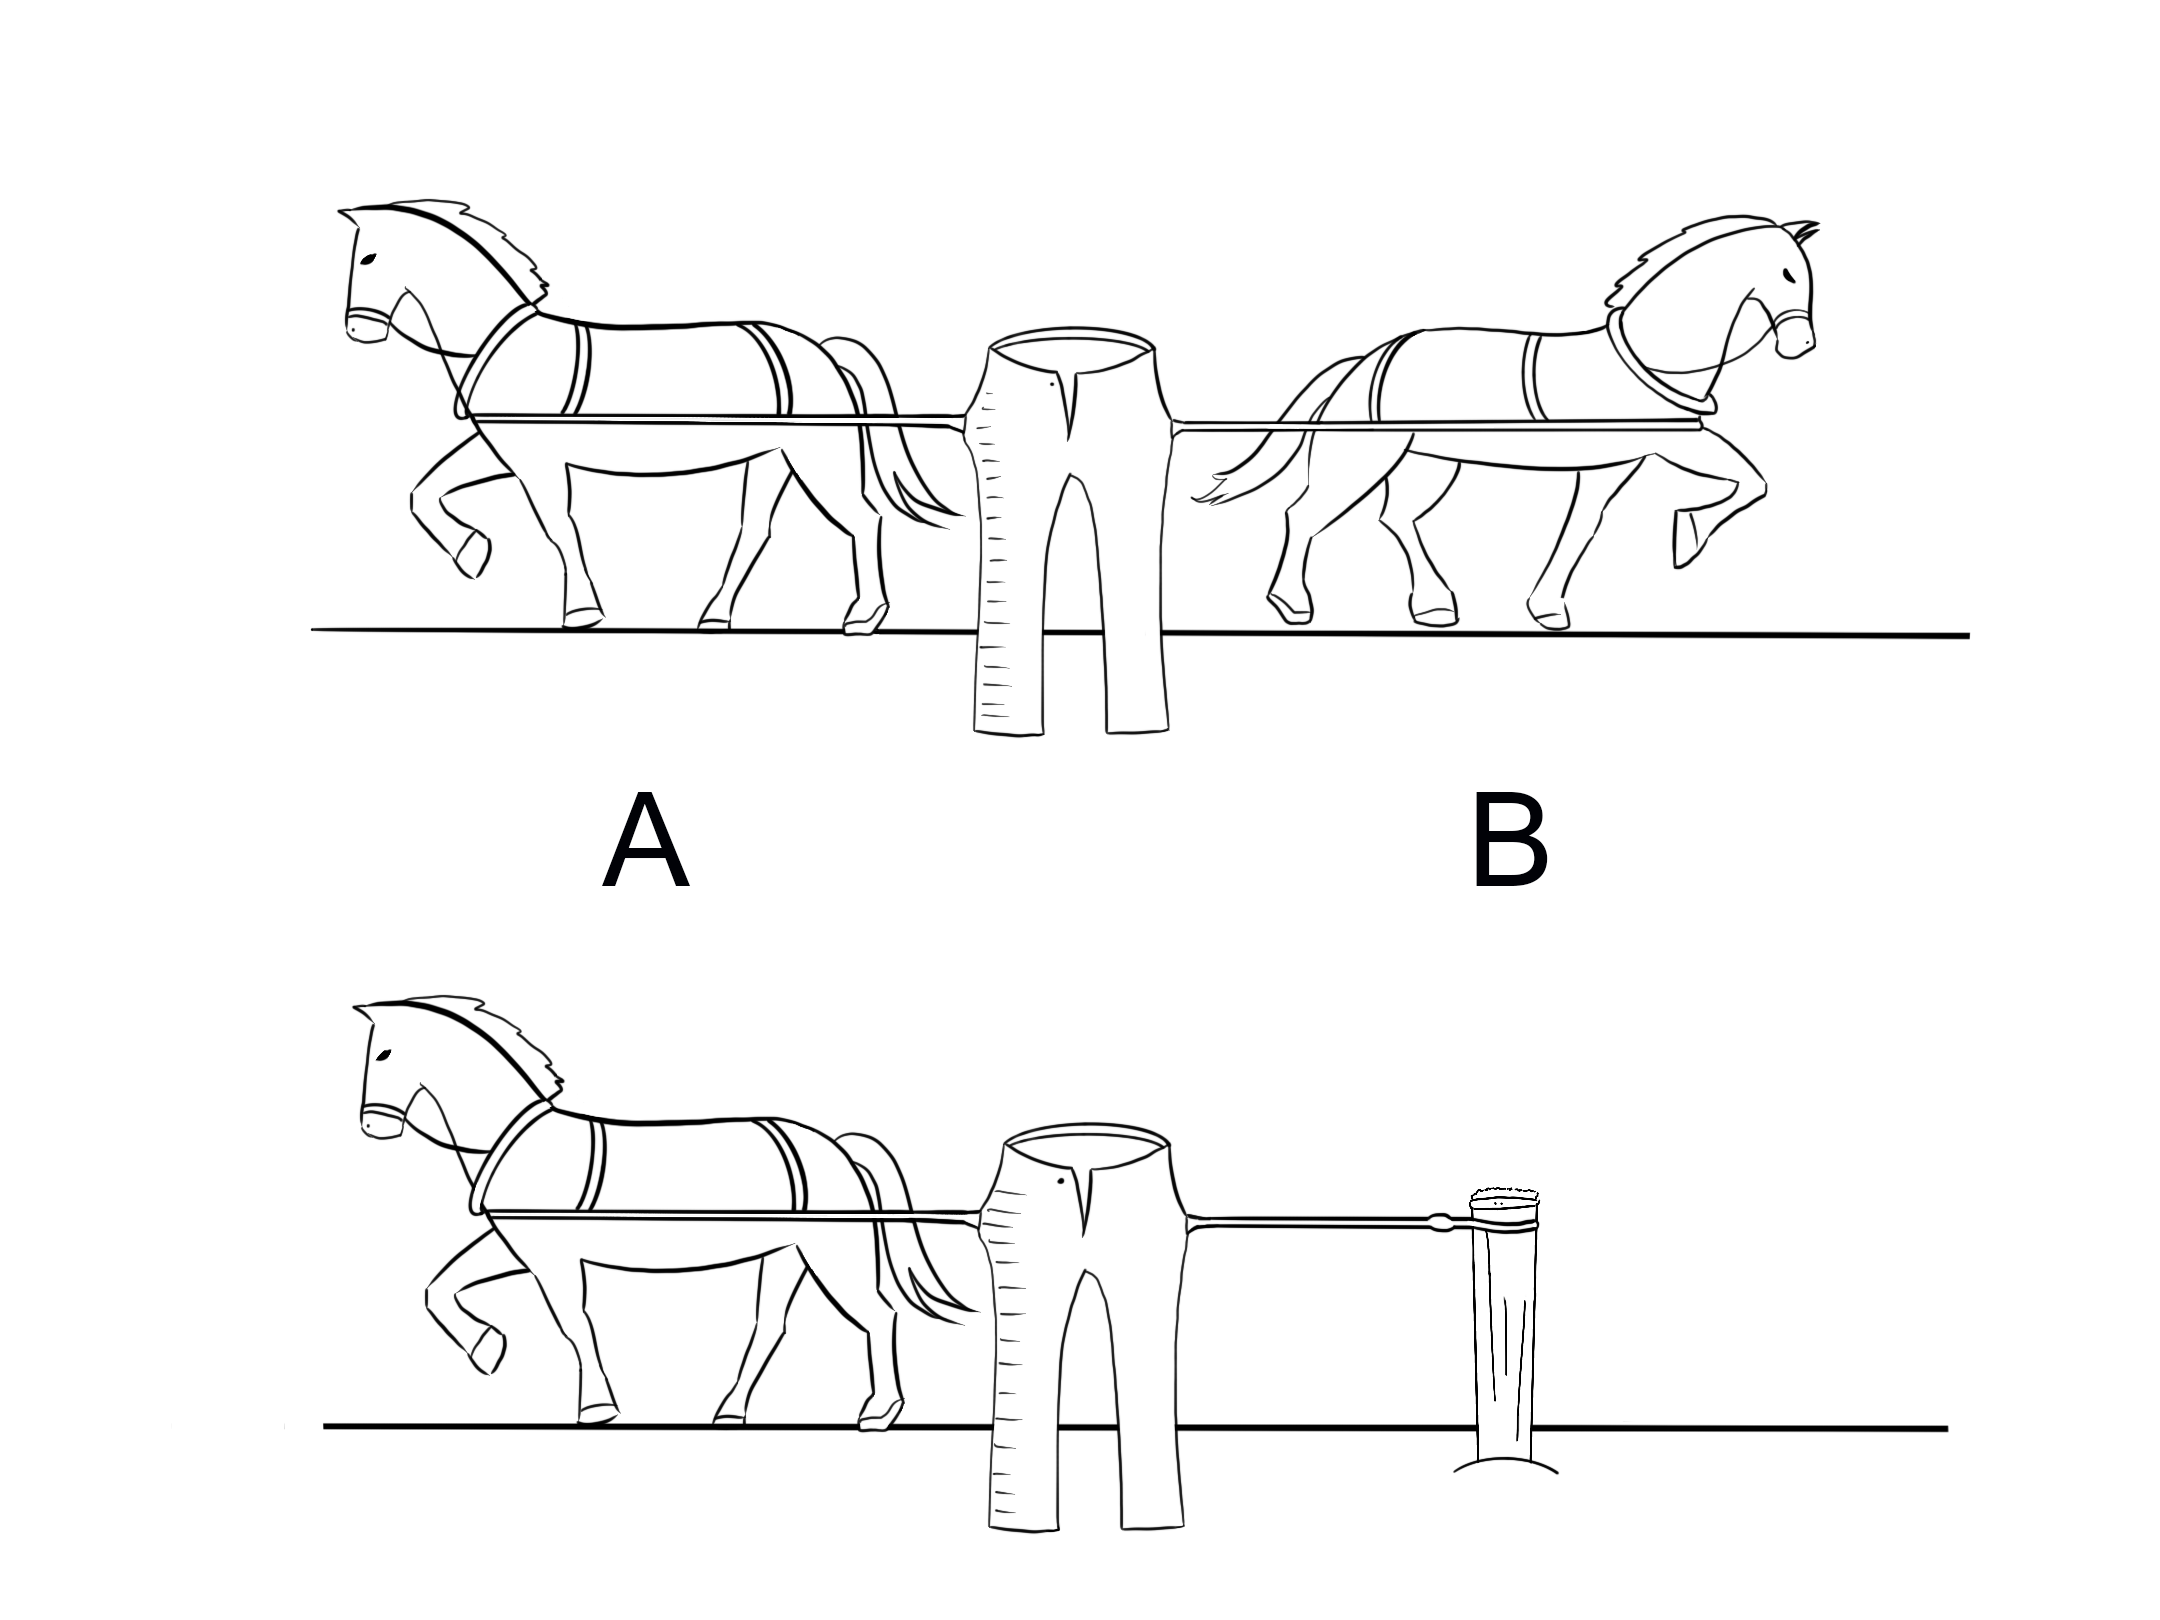 An Engineer’s View of the Two Horse Brand Figure 2. Diagram of two horses versus one horse